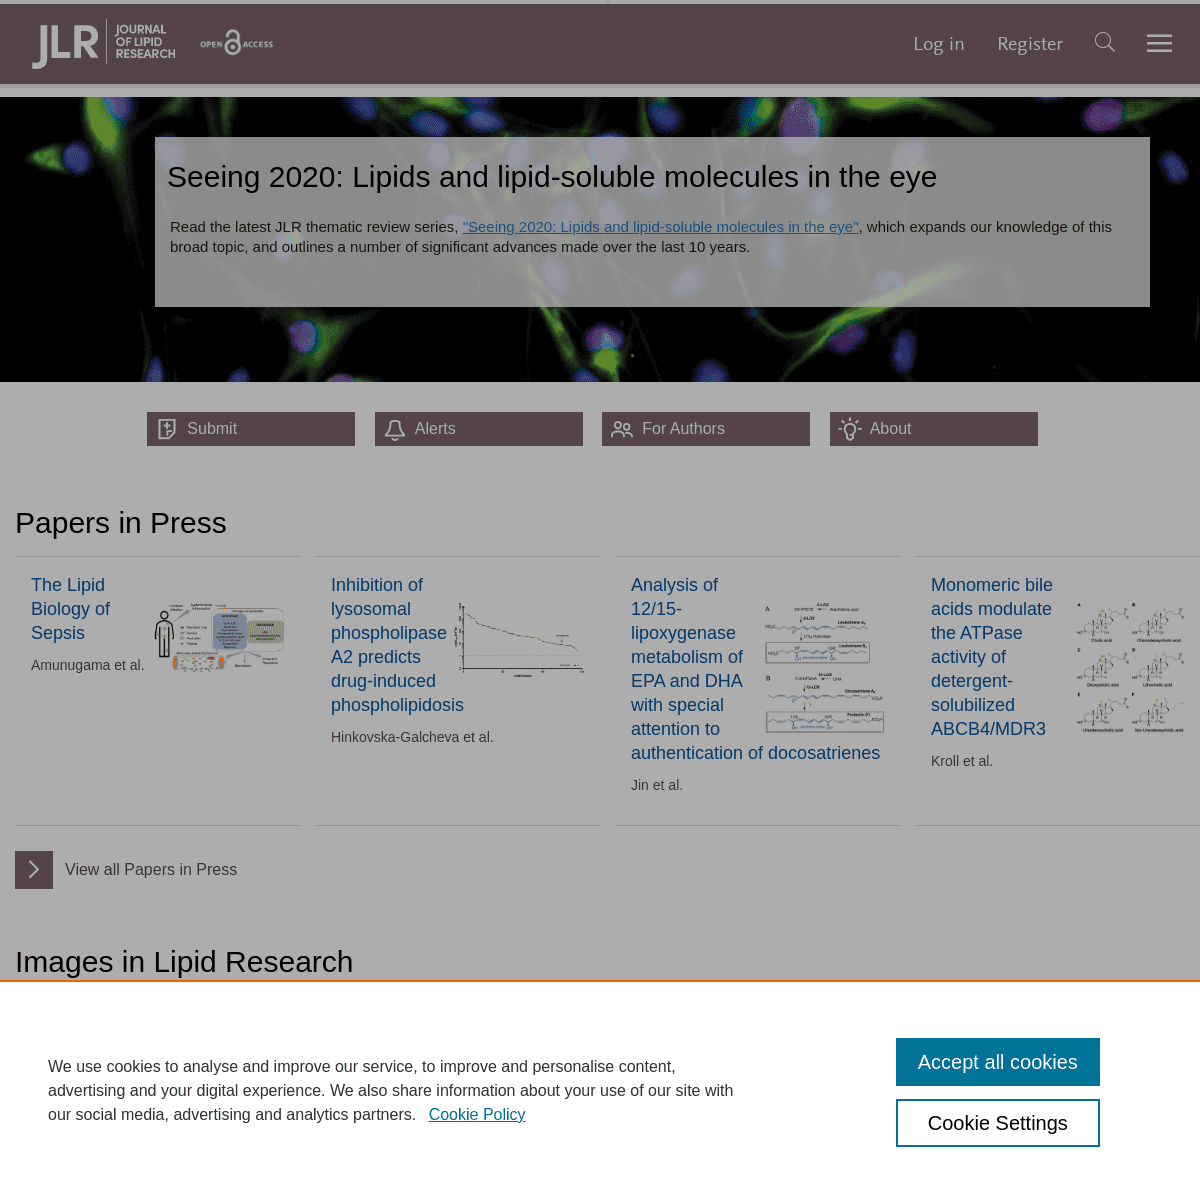 A complete backup of https://jlr.org